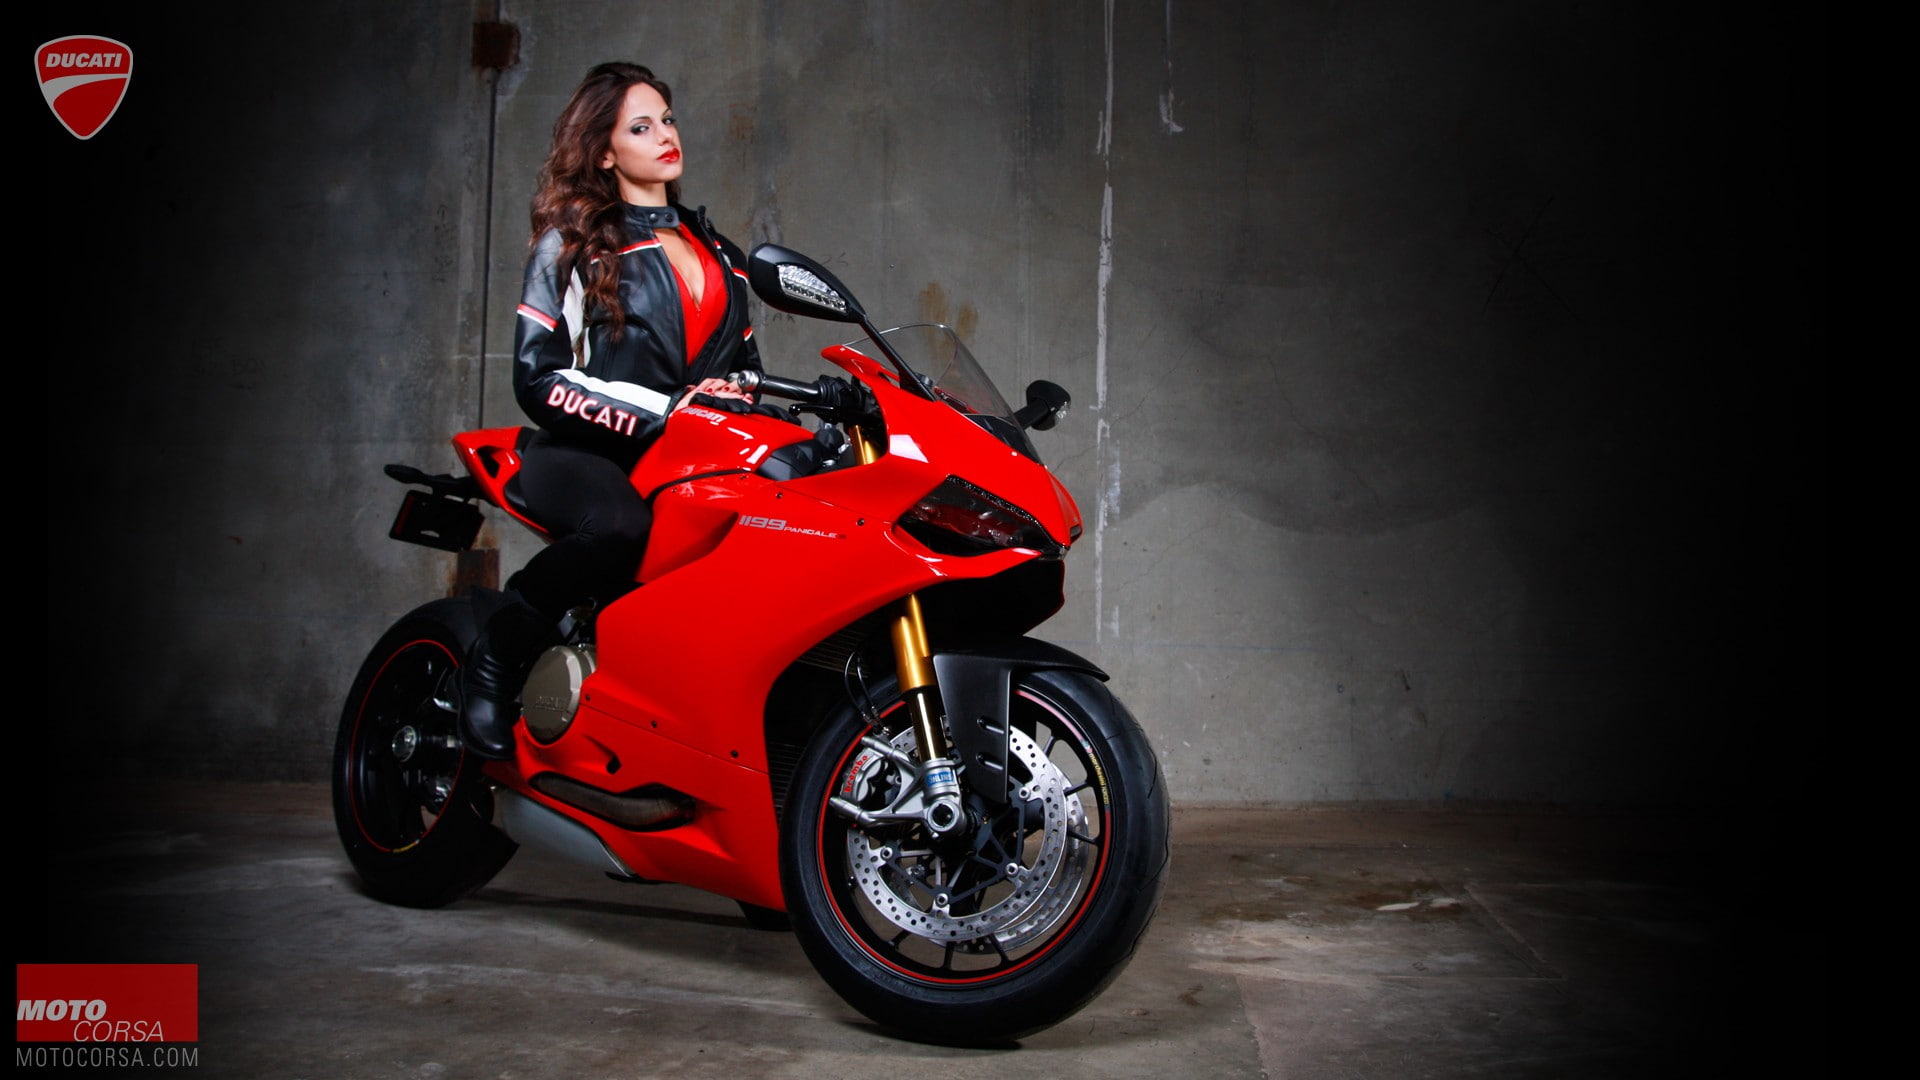 women with bikes, Ducati 1199, motorcycle, one person, mode of transportation